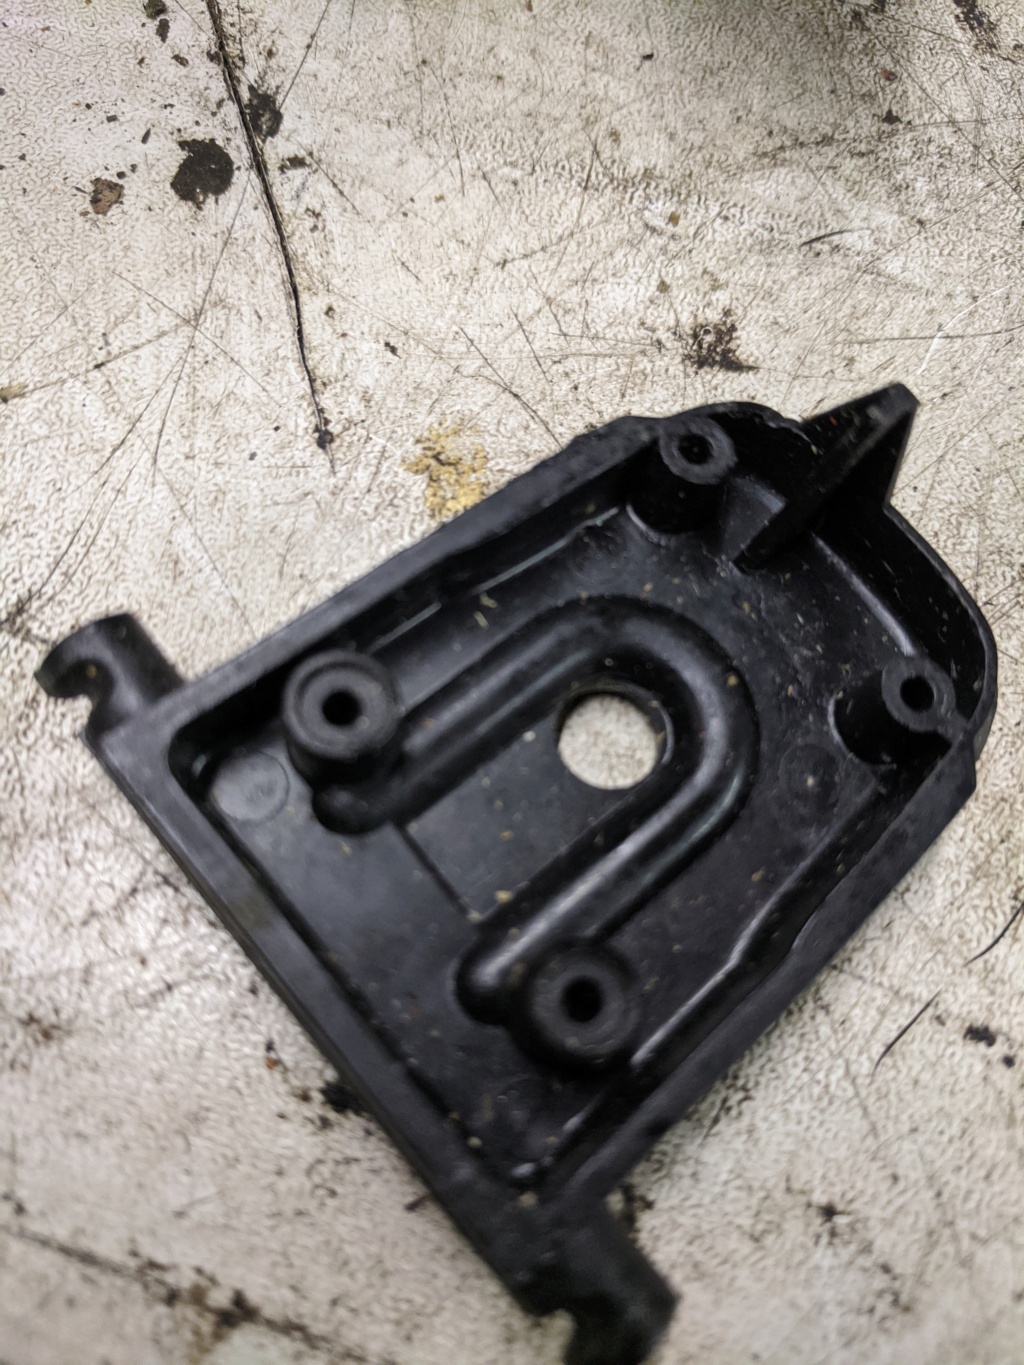 whats this gizmo then? Engine mount from toy? Cox_th11